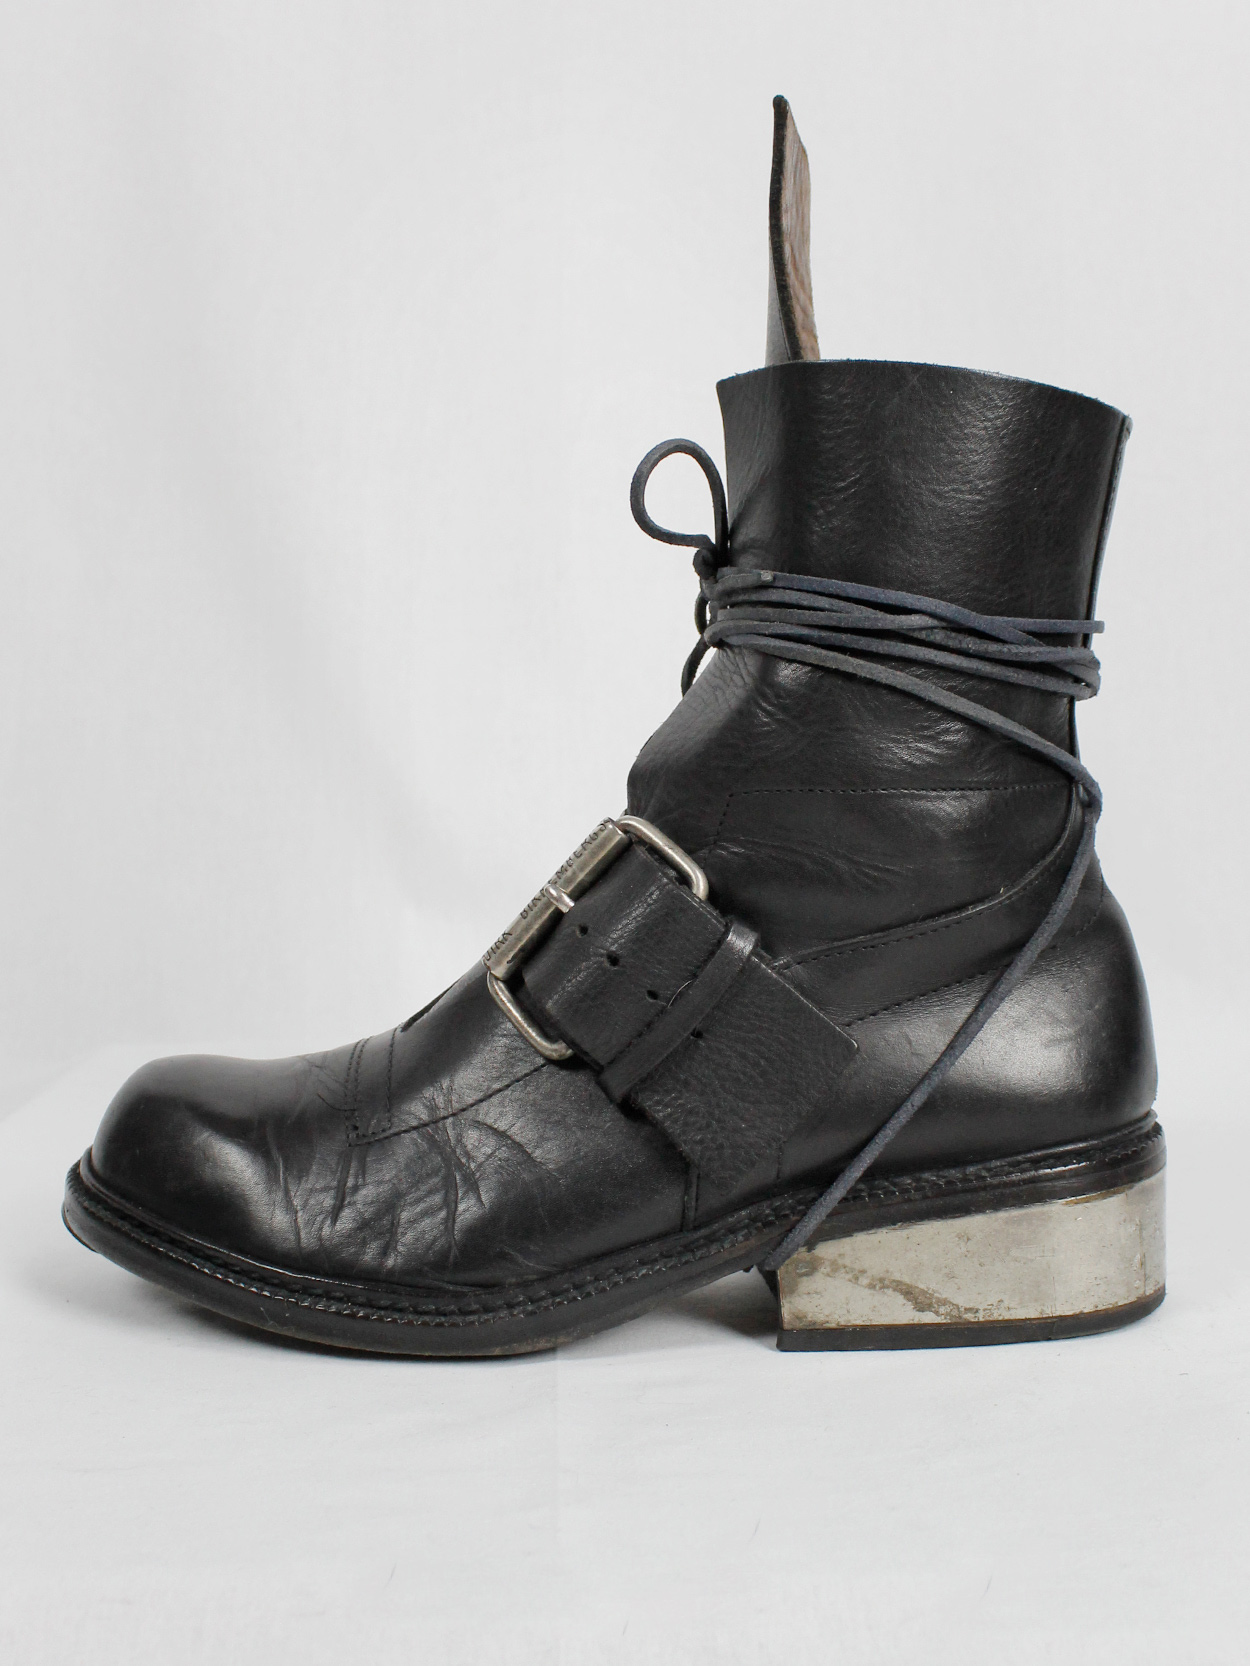 vintage Dirk Bikkembergs black tall boots with belt strap and laces (61) — late 90’s